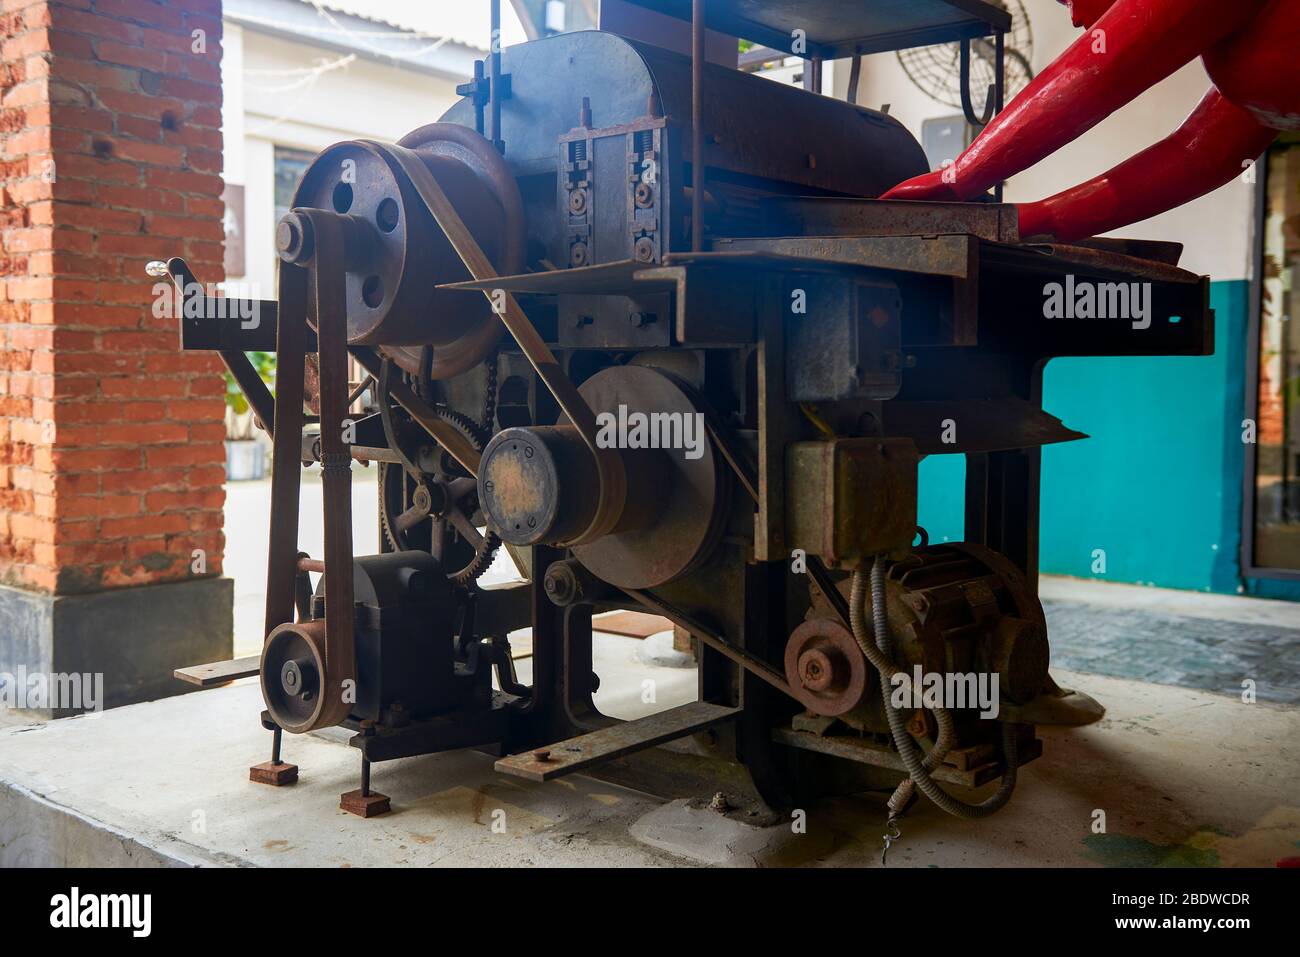 An old-fashioned industrial textile machine Stock Photo